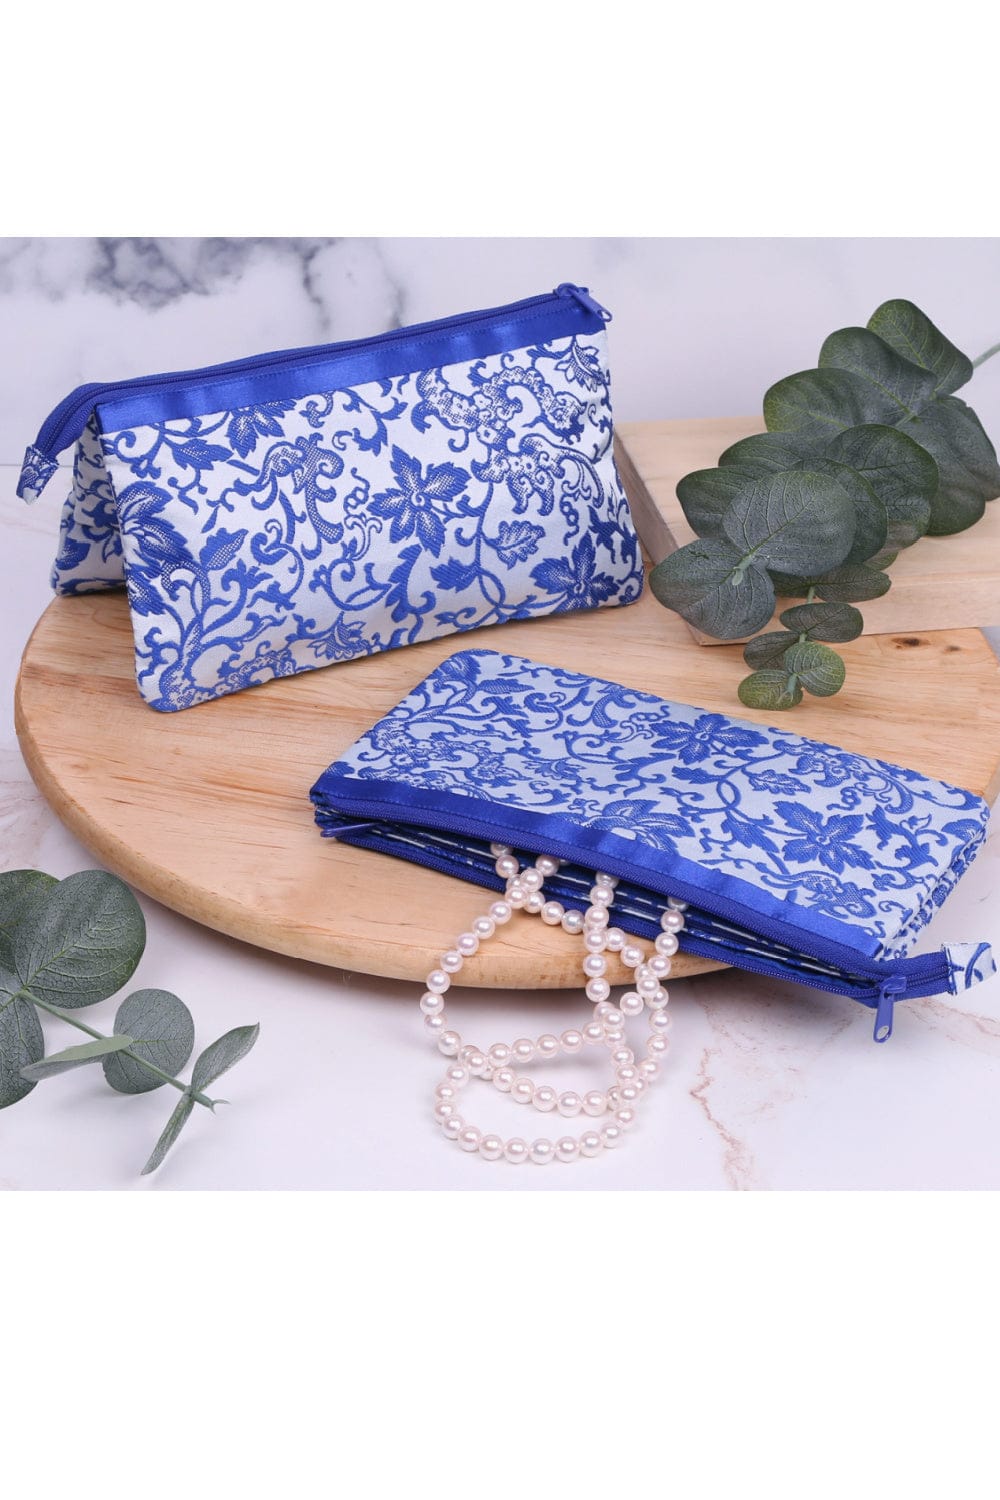 Tapestry Blue and white 3 section makeup bag with top blue zipper.